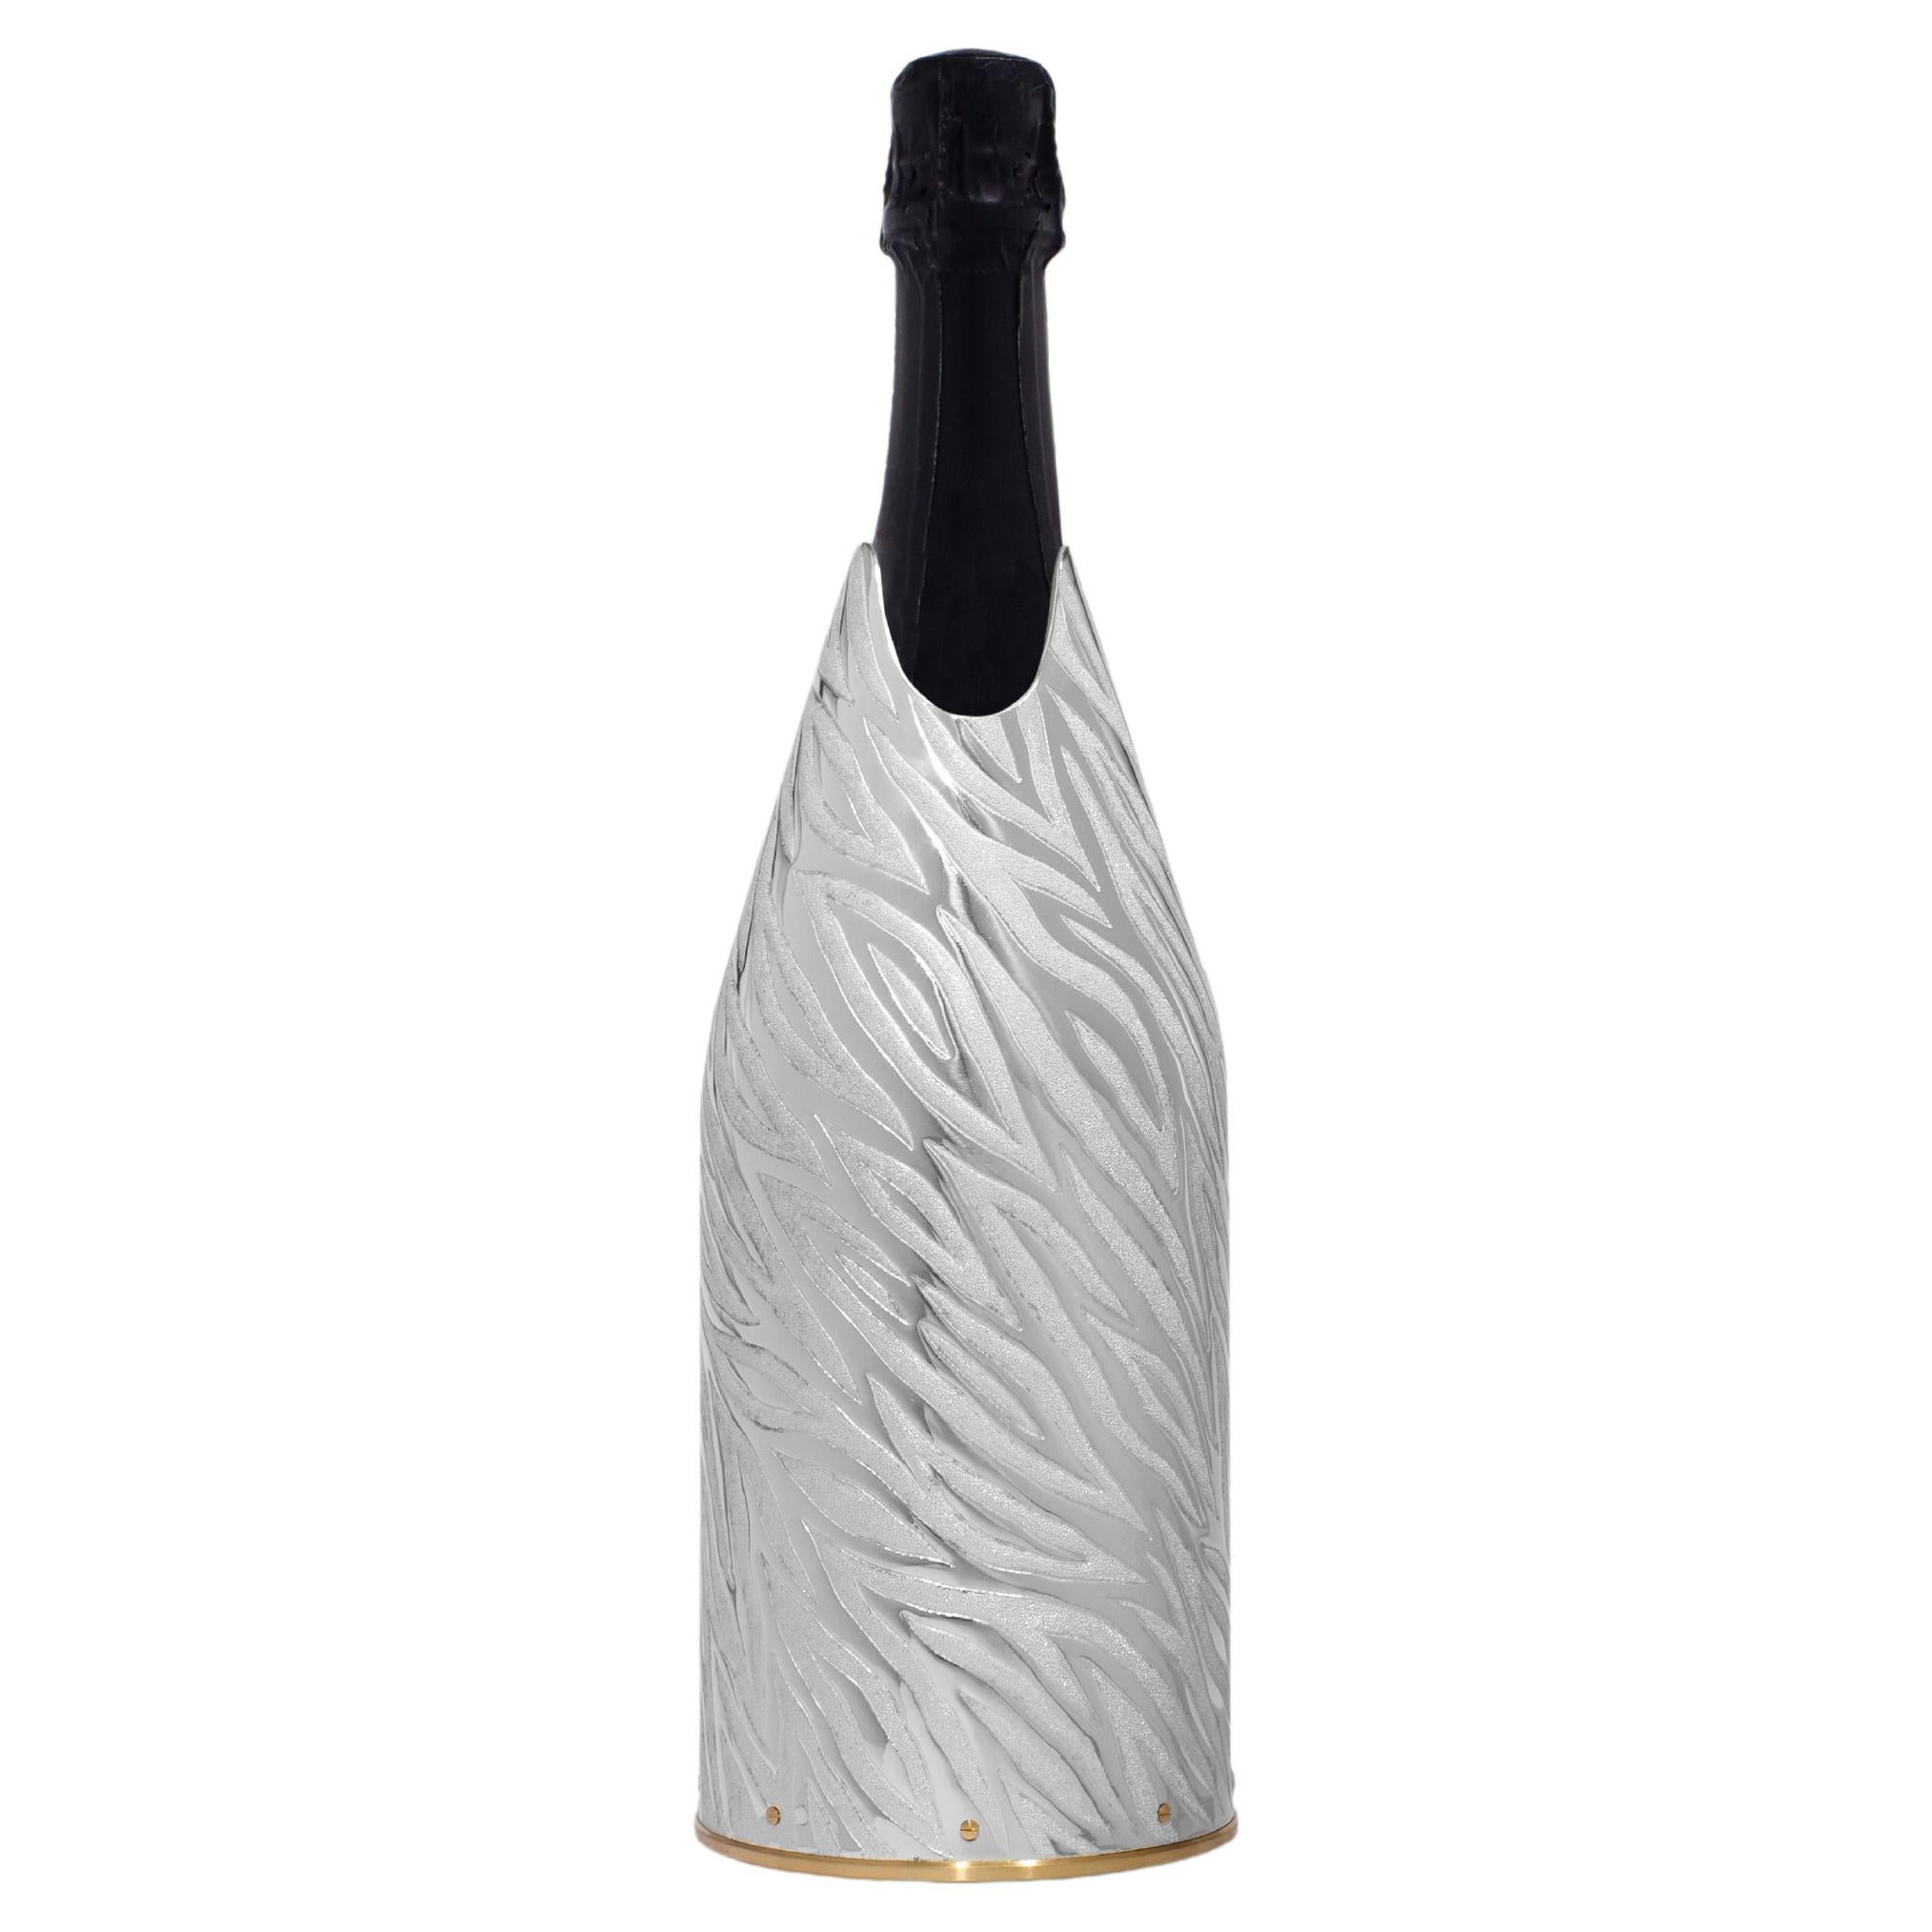 Our bottle champagne k-Over Onda belongs to our Nature collection
 
This  K-Over has been handcrafted by Marco Fedi, a Florentine master goldsmith.
The techniques used for this K-Over are engraving and chiseling. The production process took a few